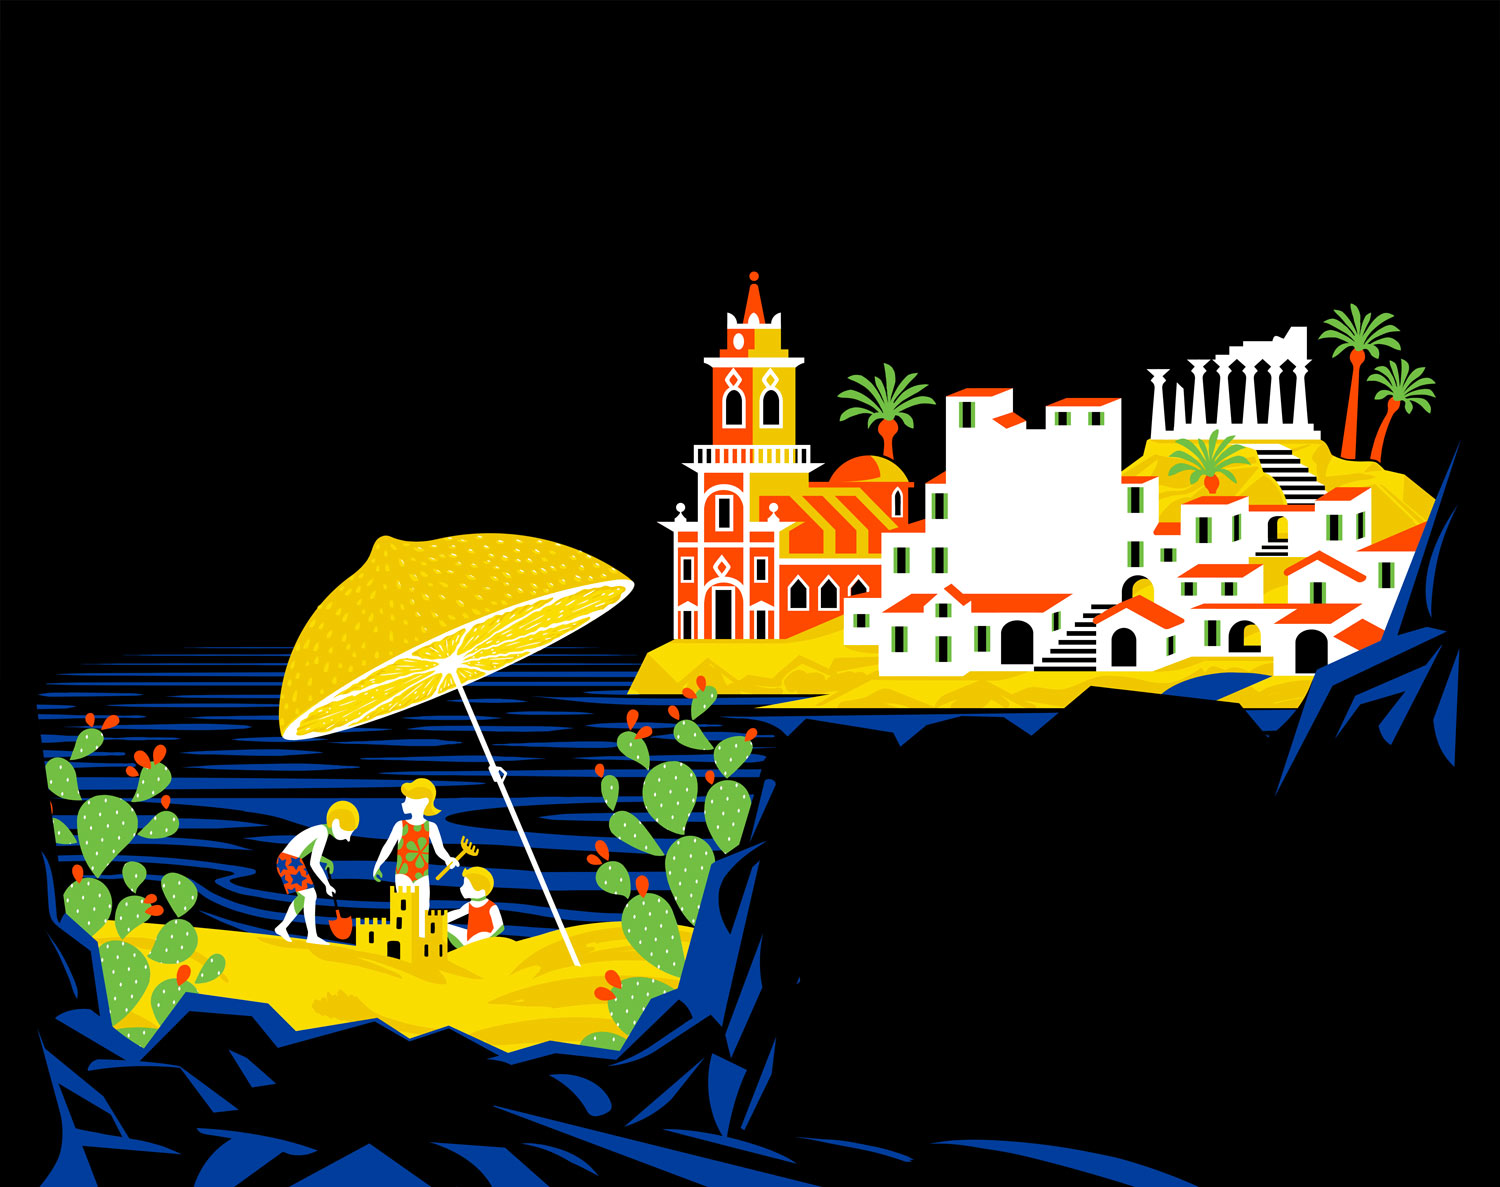 The illustration for the can design dedicated to Sicily. Typical elements of the Italian island such as the fishing village, prickly pears and the ruins of a Greek temple in the background are depicted on this image.